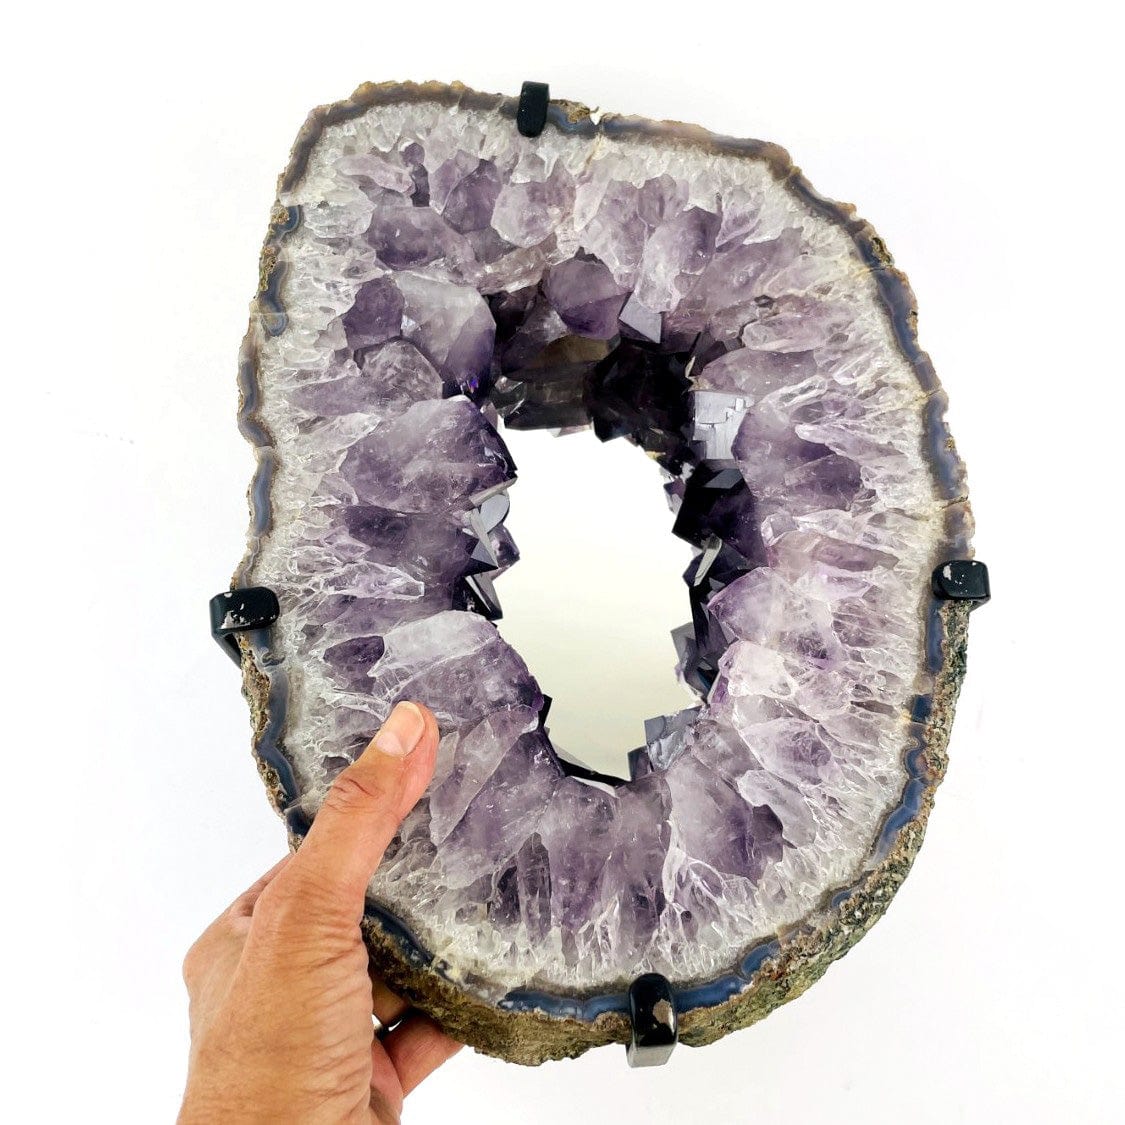 Amethyst Crystal Point Mirror with a hand for size reference